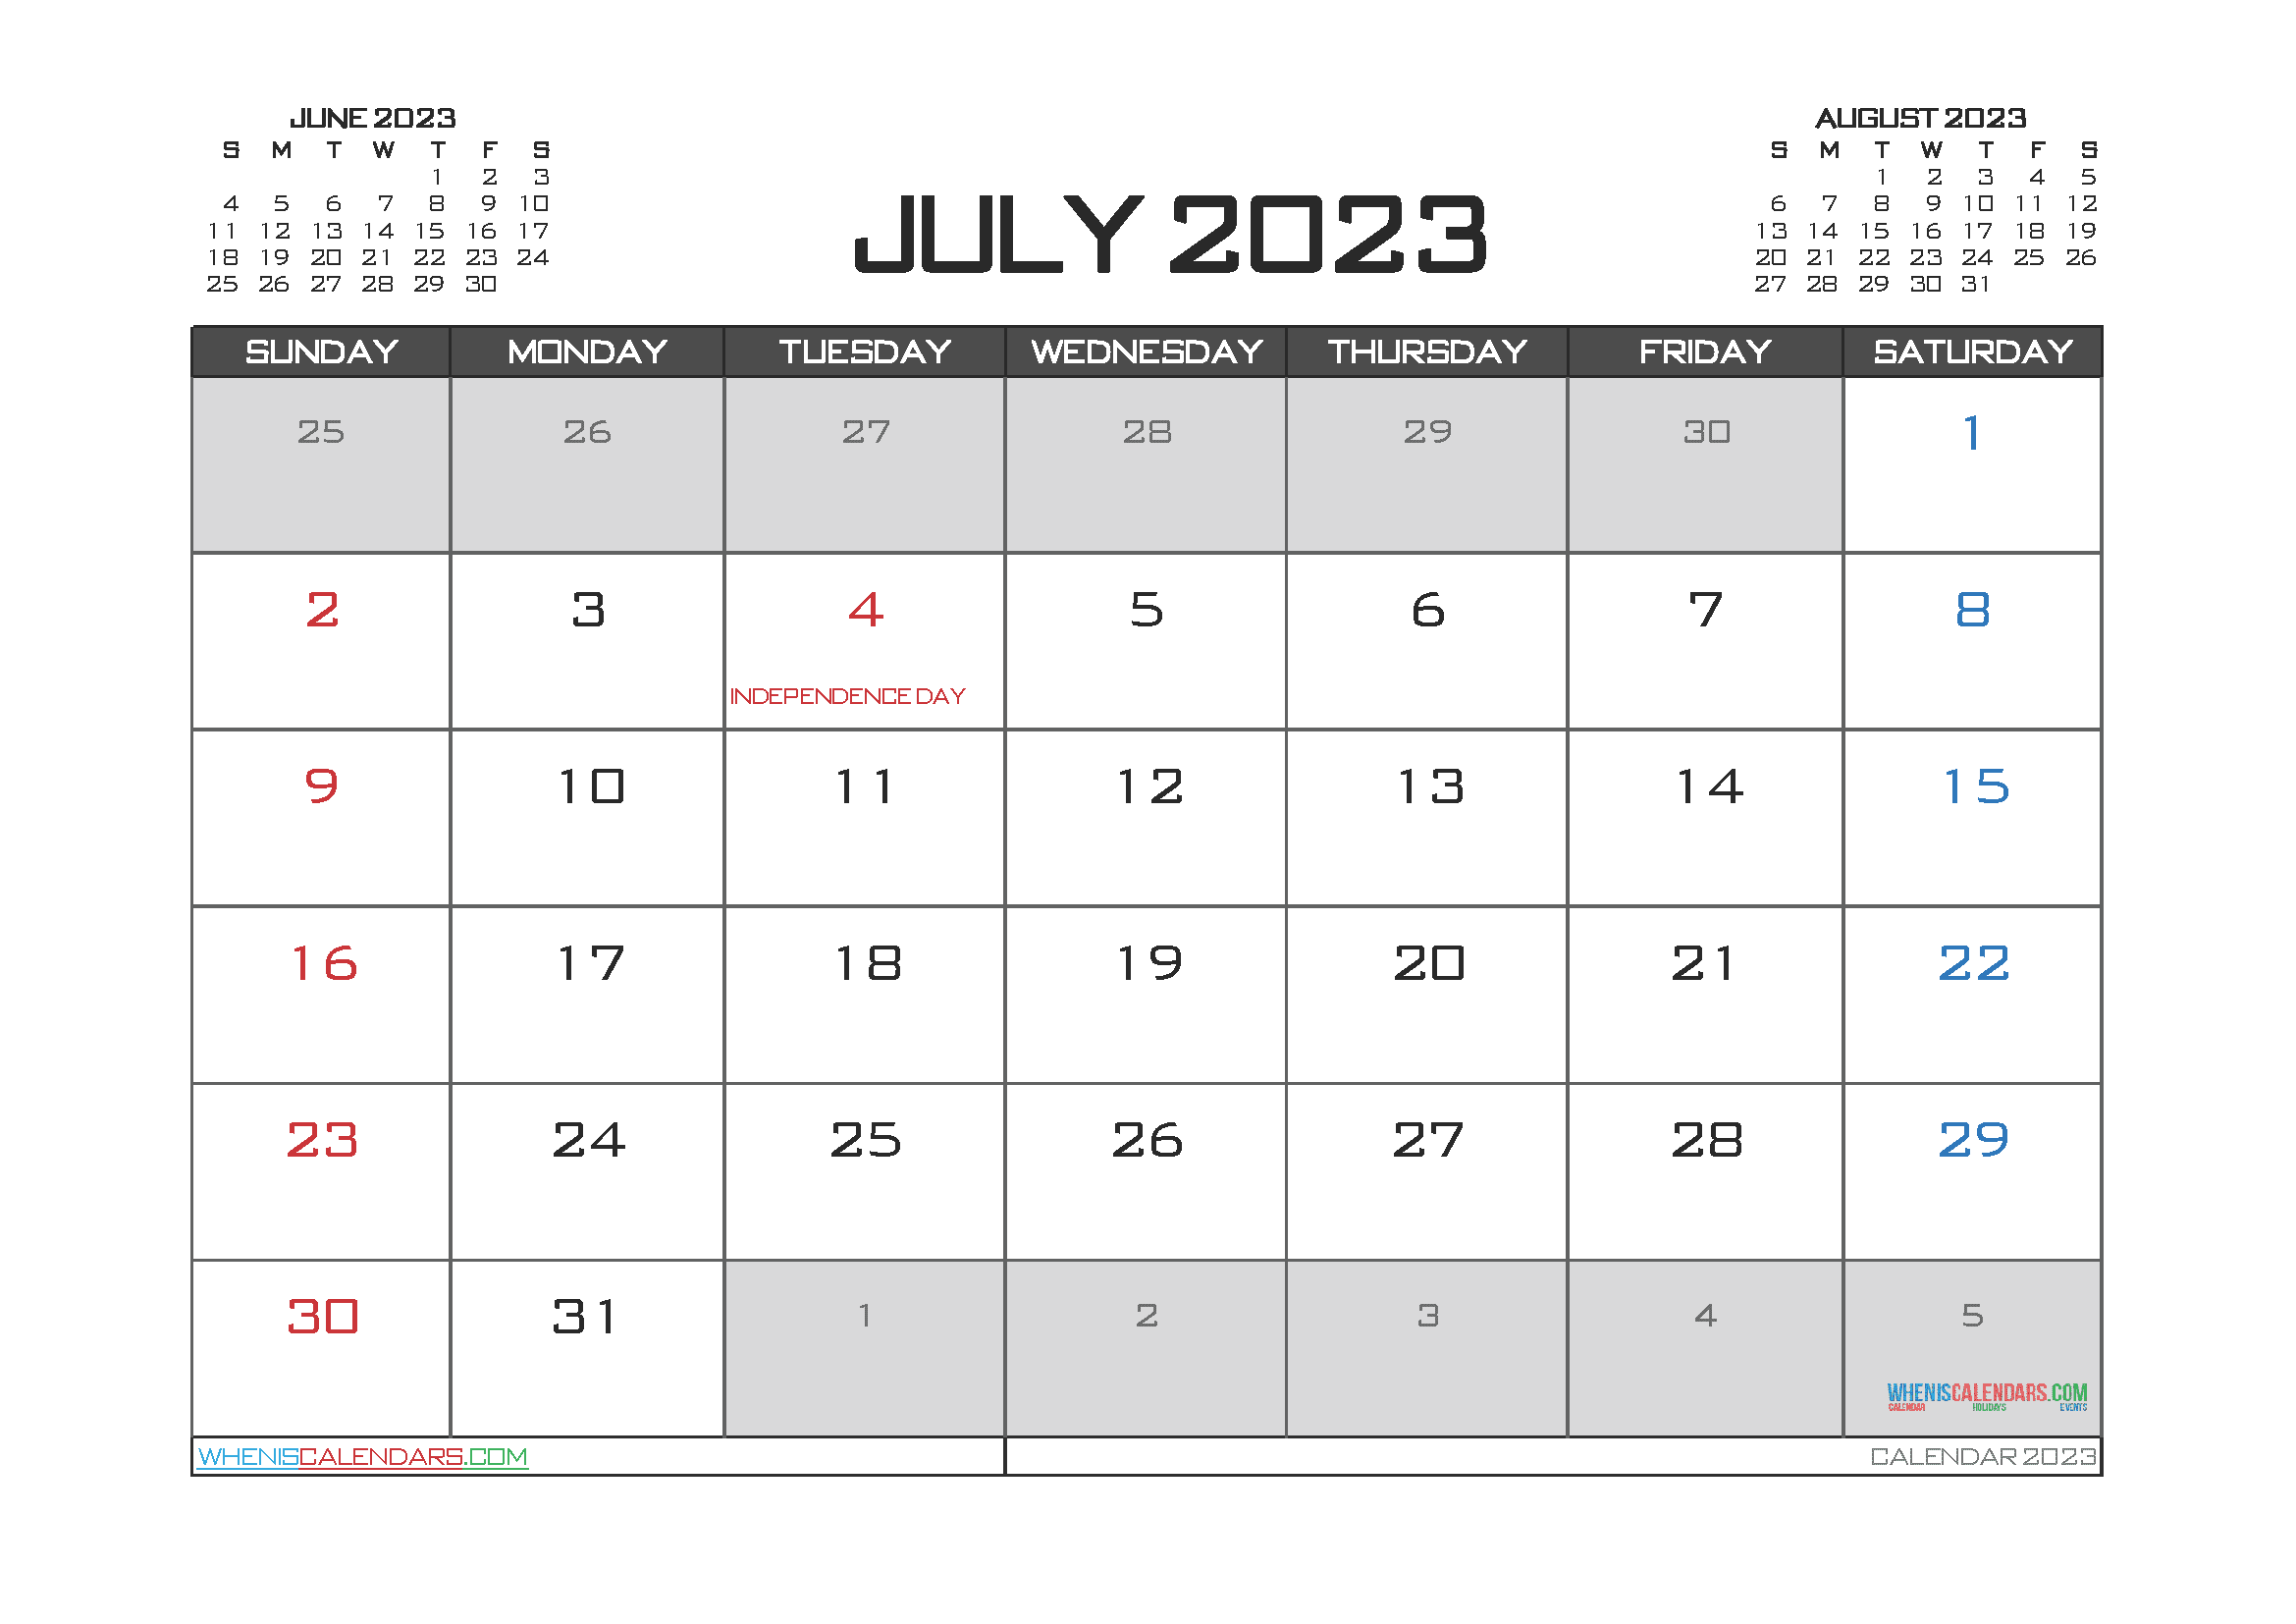 Free Printable Calendar 2023 July with Holidays PDF in Landscape